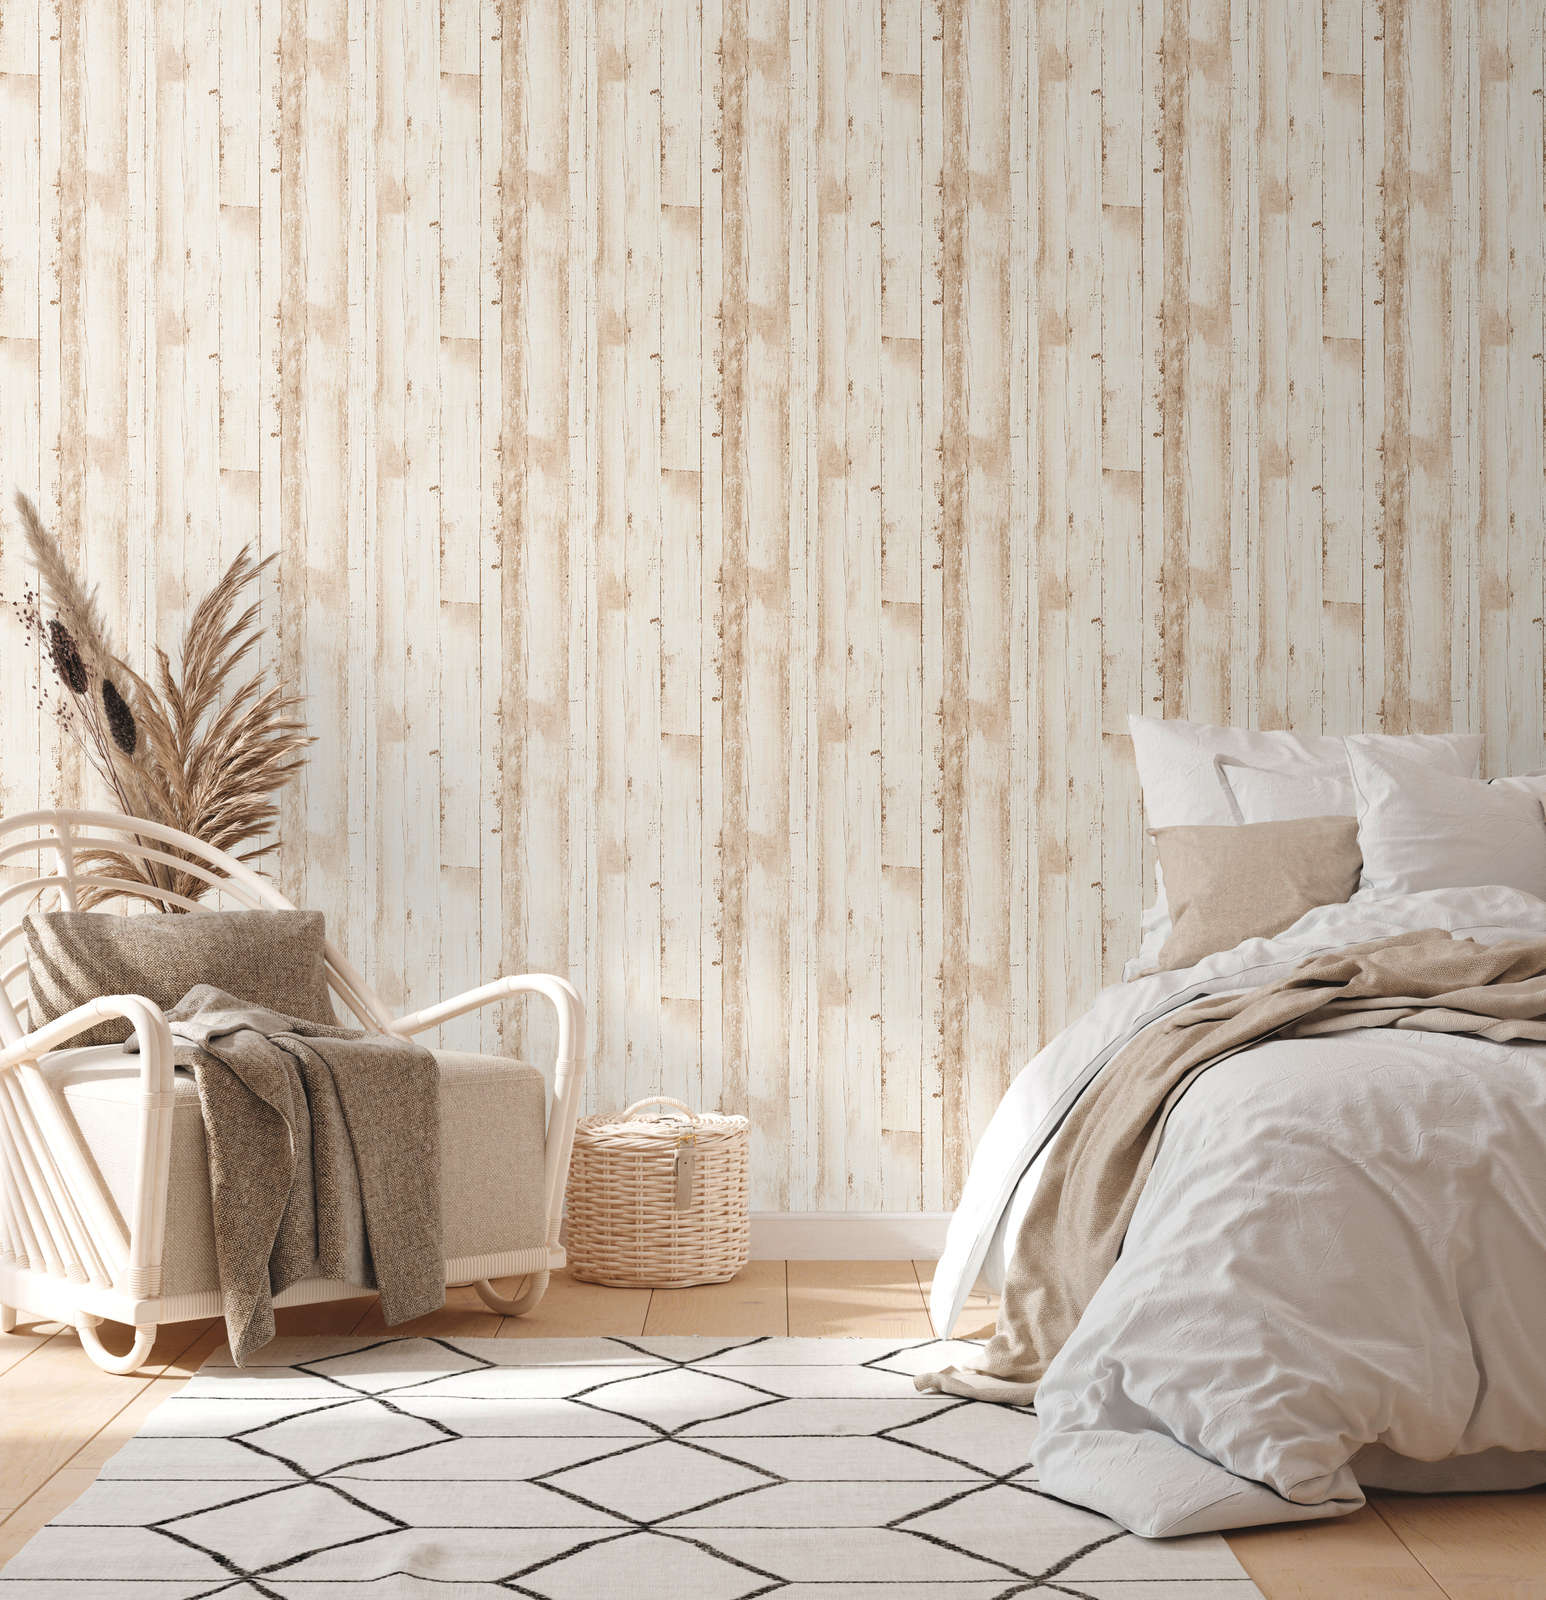             Non-woven wood wallpaper with plank look PVC-free - Beige, White
        